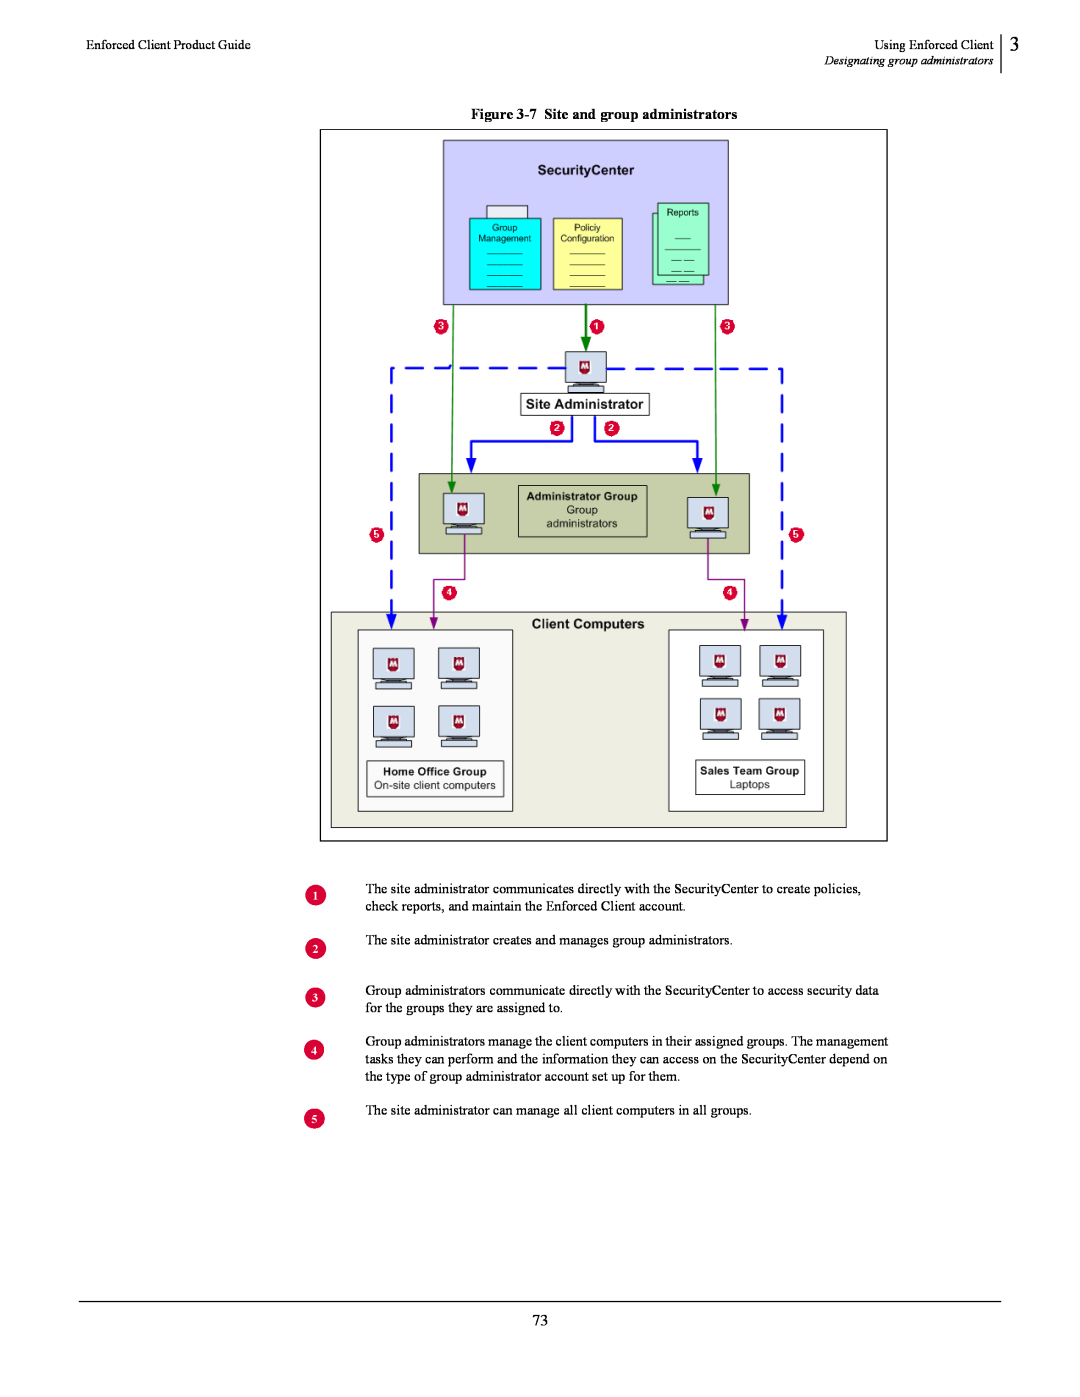 SonicWALL 4.5 manual 7 Site and group administrators 